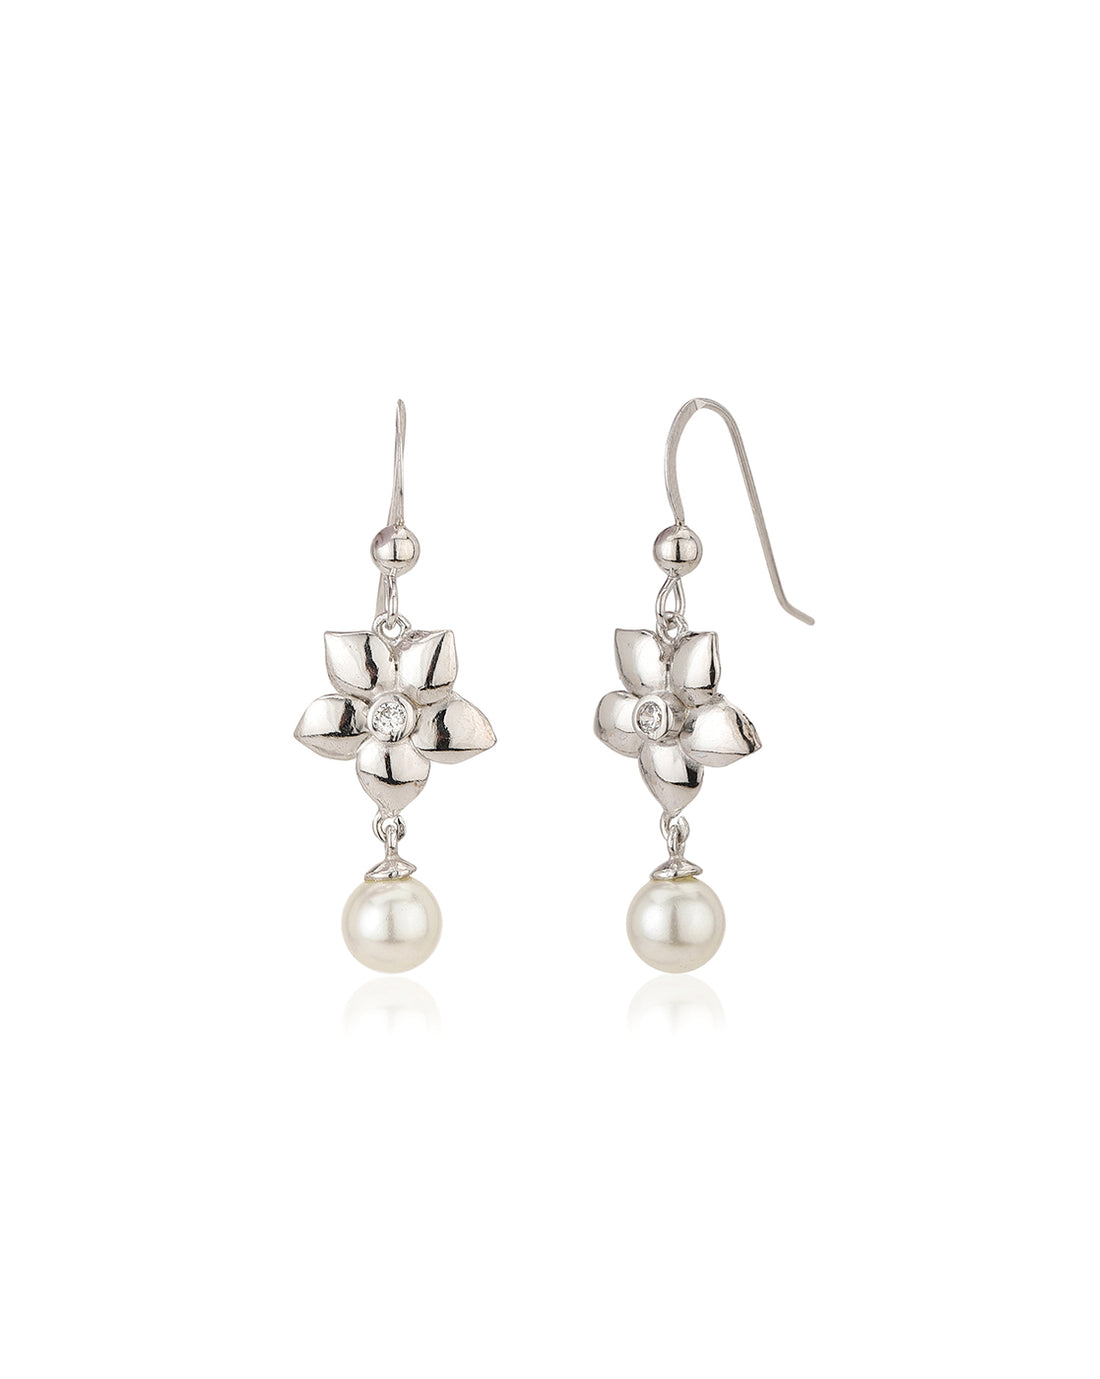 Carlton London Rhodium Plated Cz Floral Drop Earring With Dangling Pearl For Women